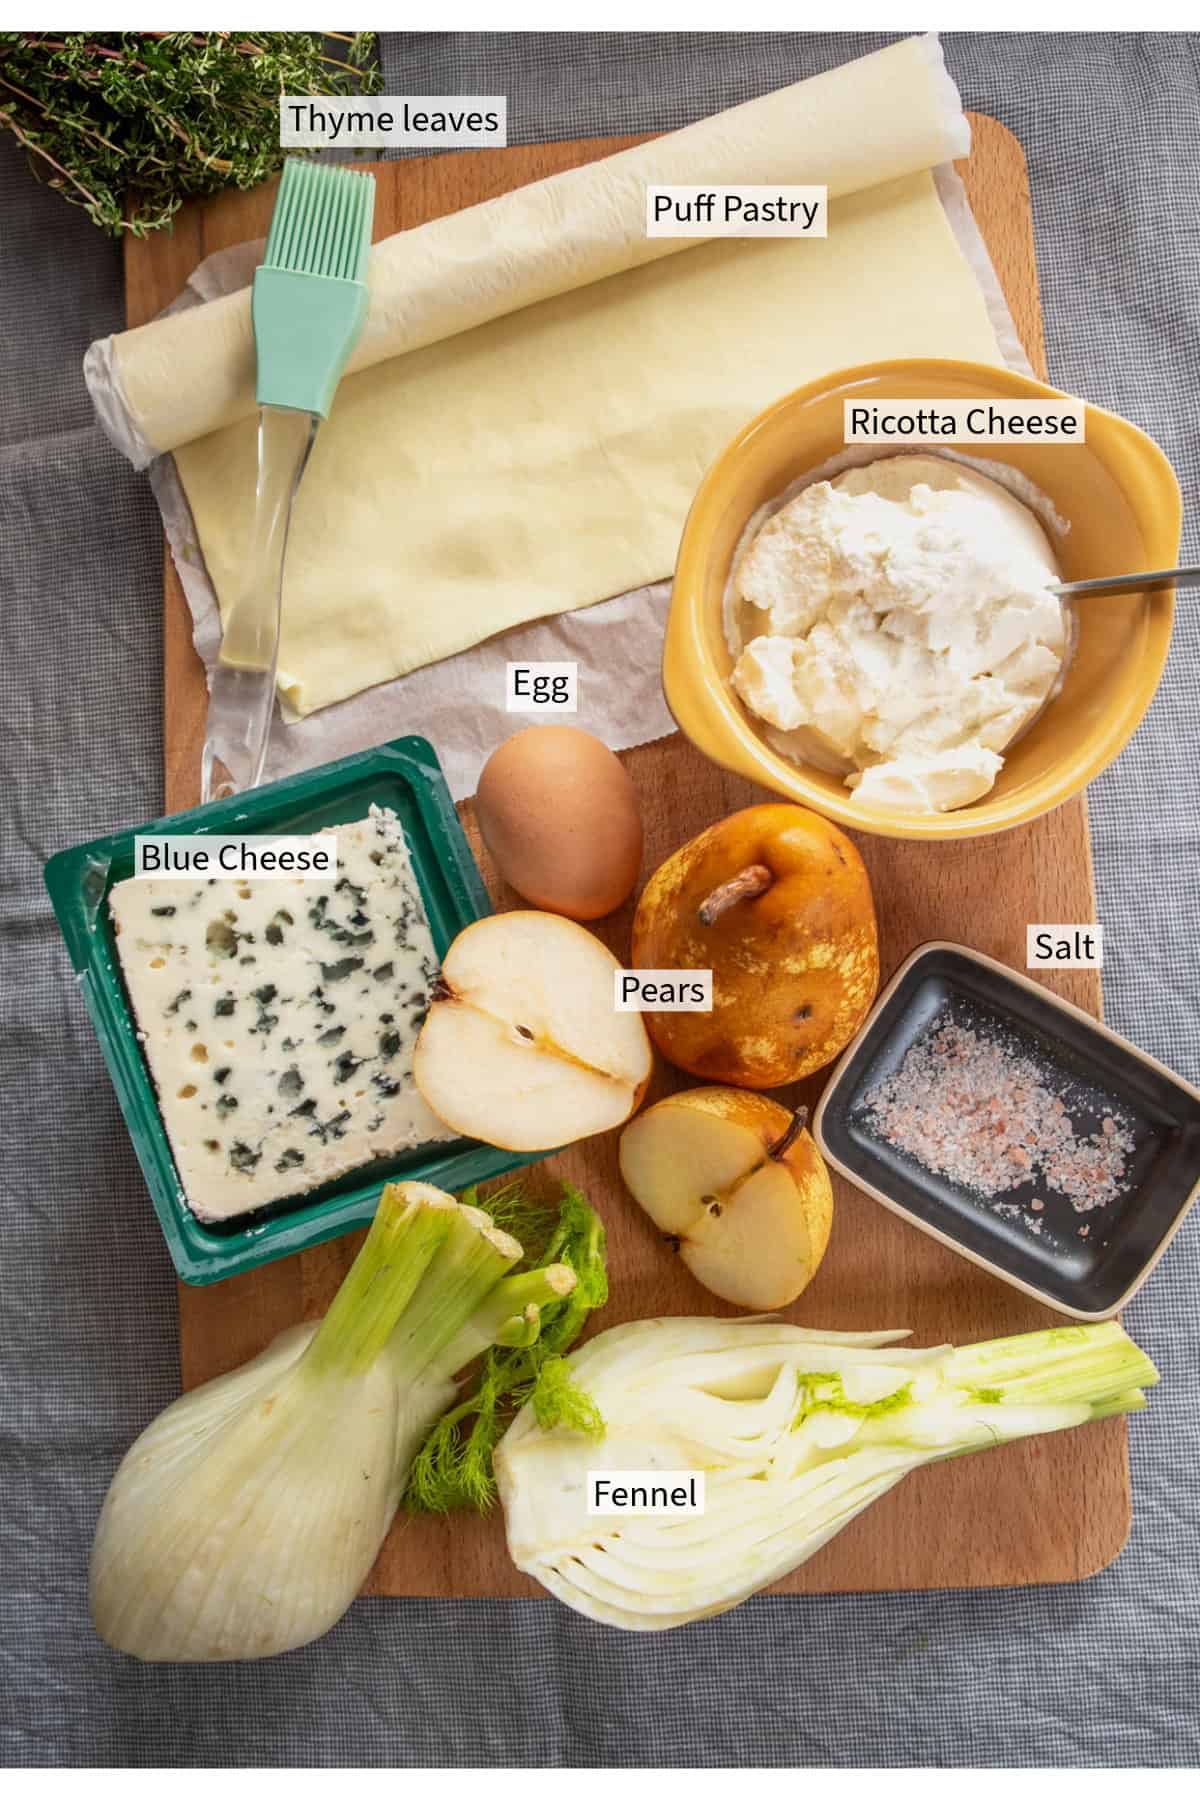 A cutting board with ingredients for a pear and blue cheese tart with fennel.